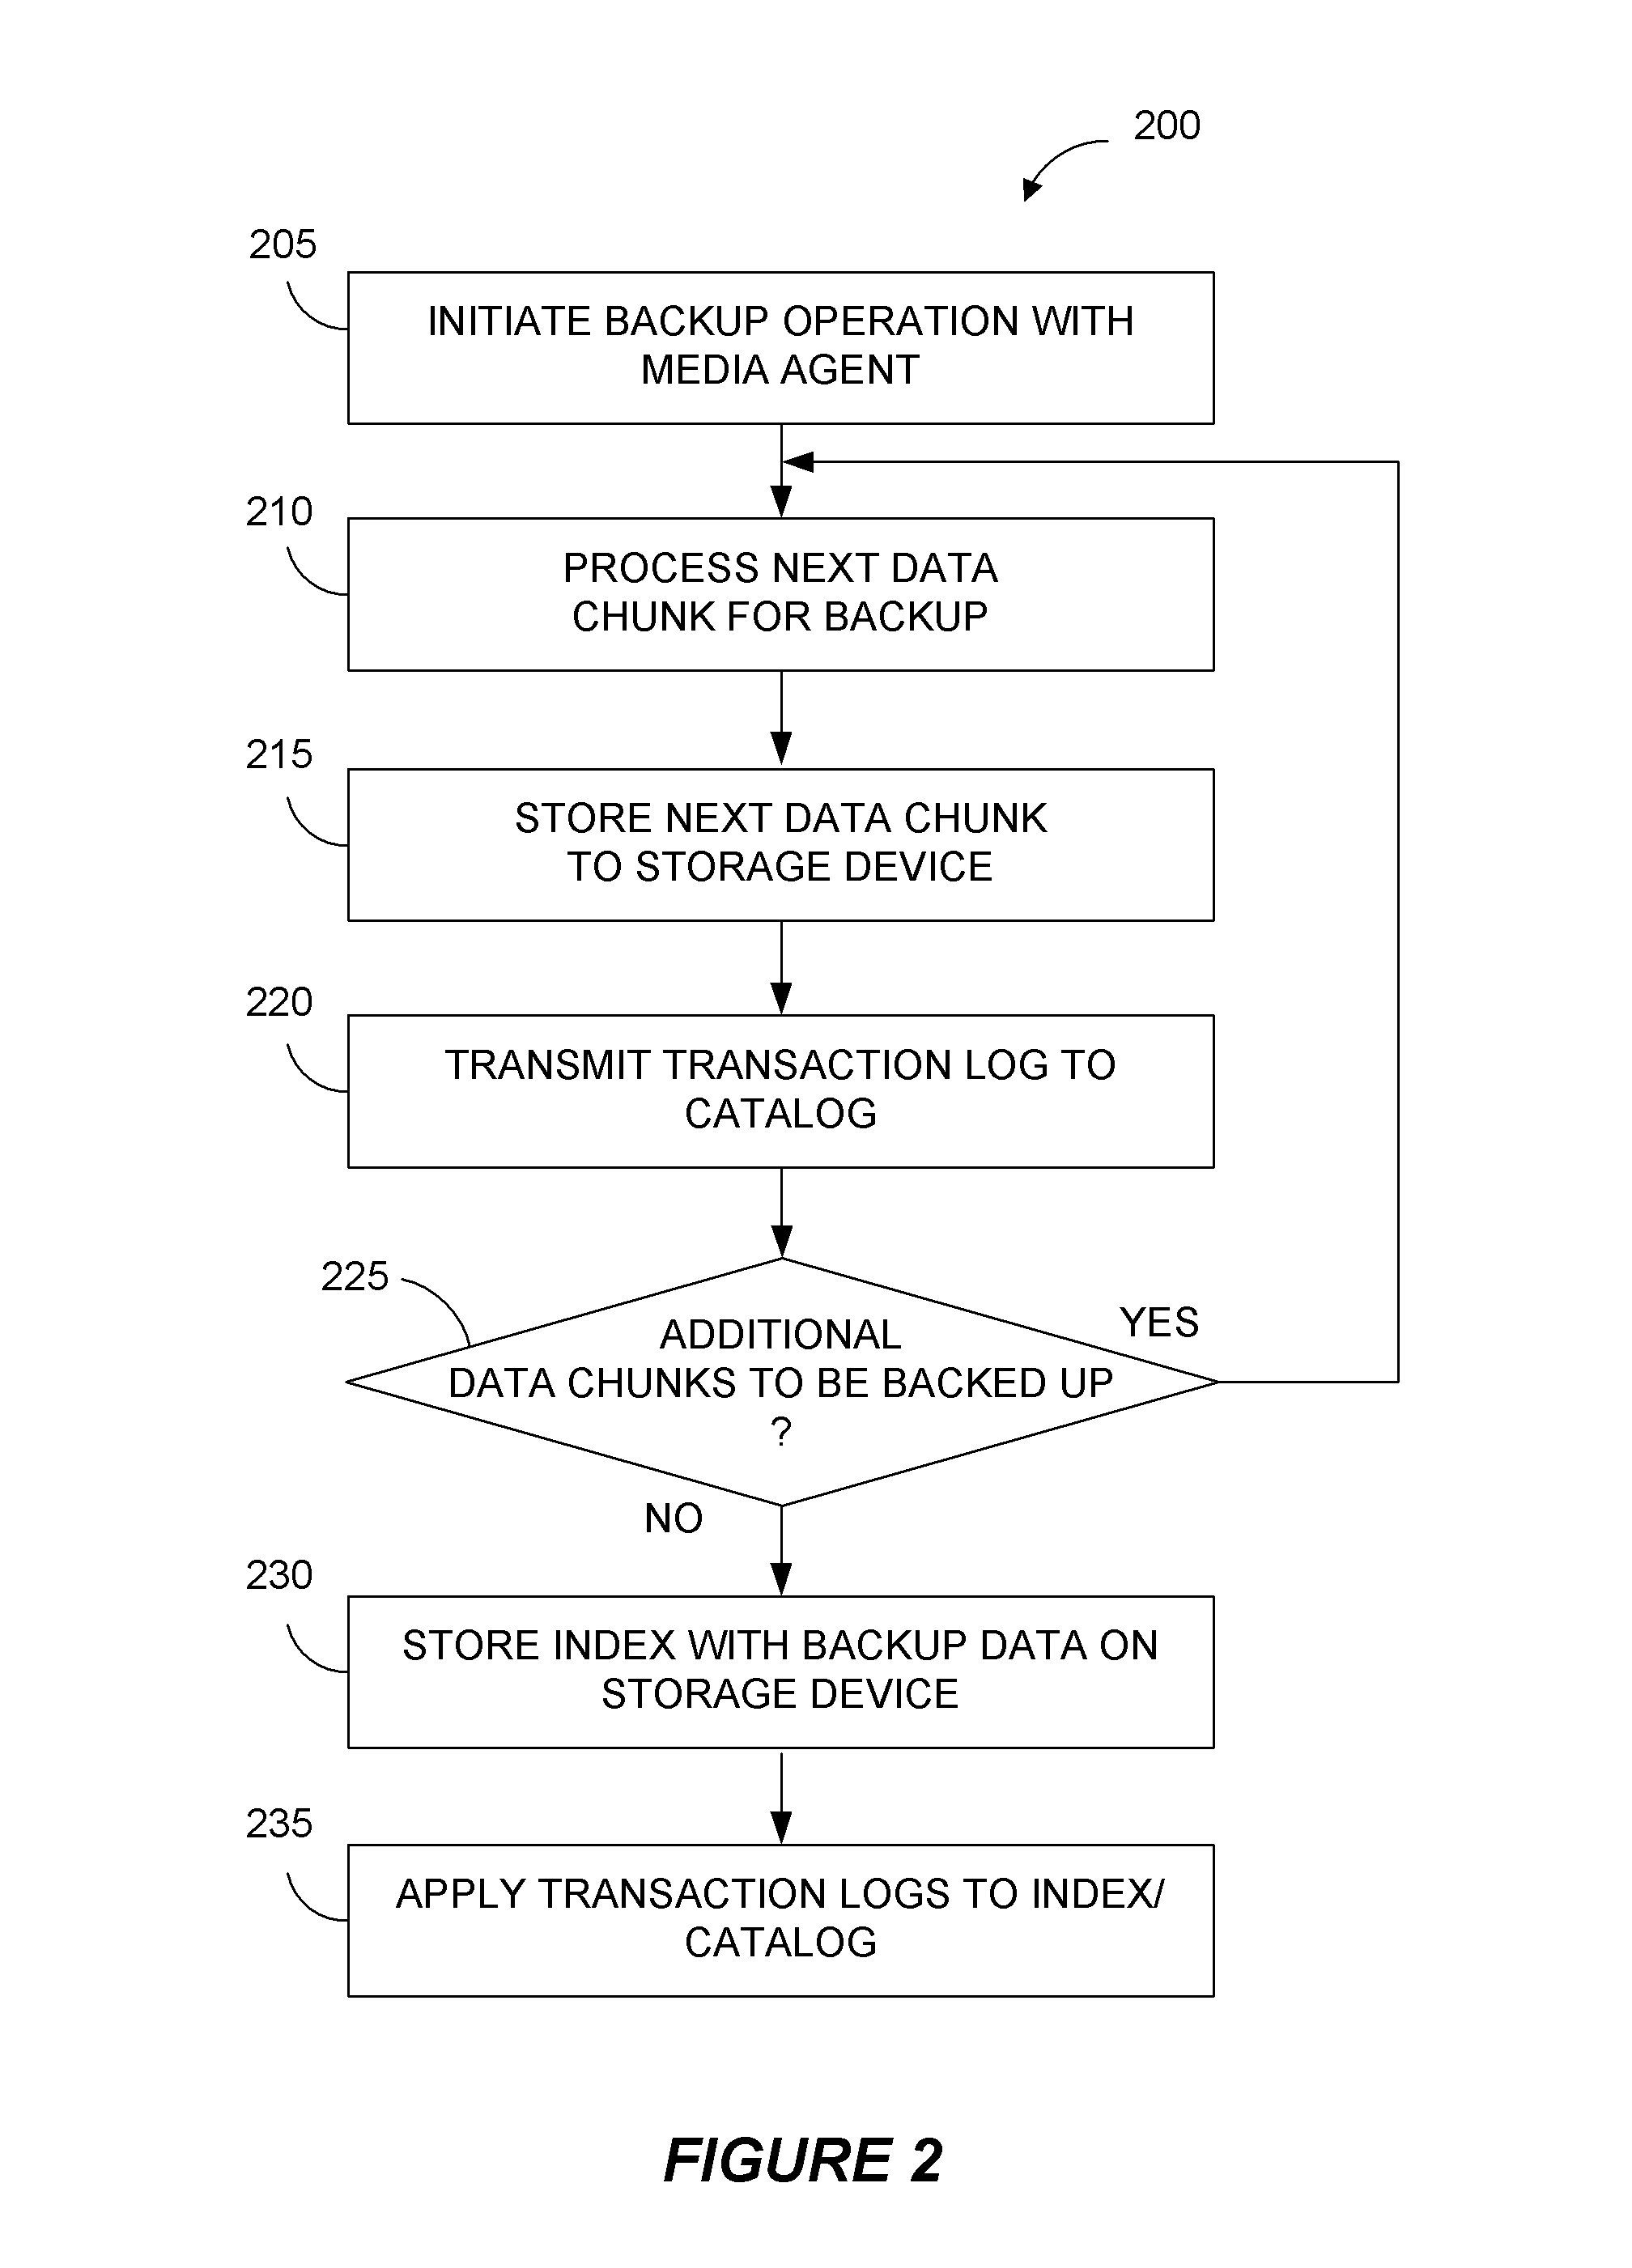 Failover systems and methods for performing backup operations